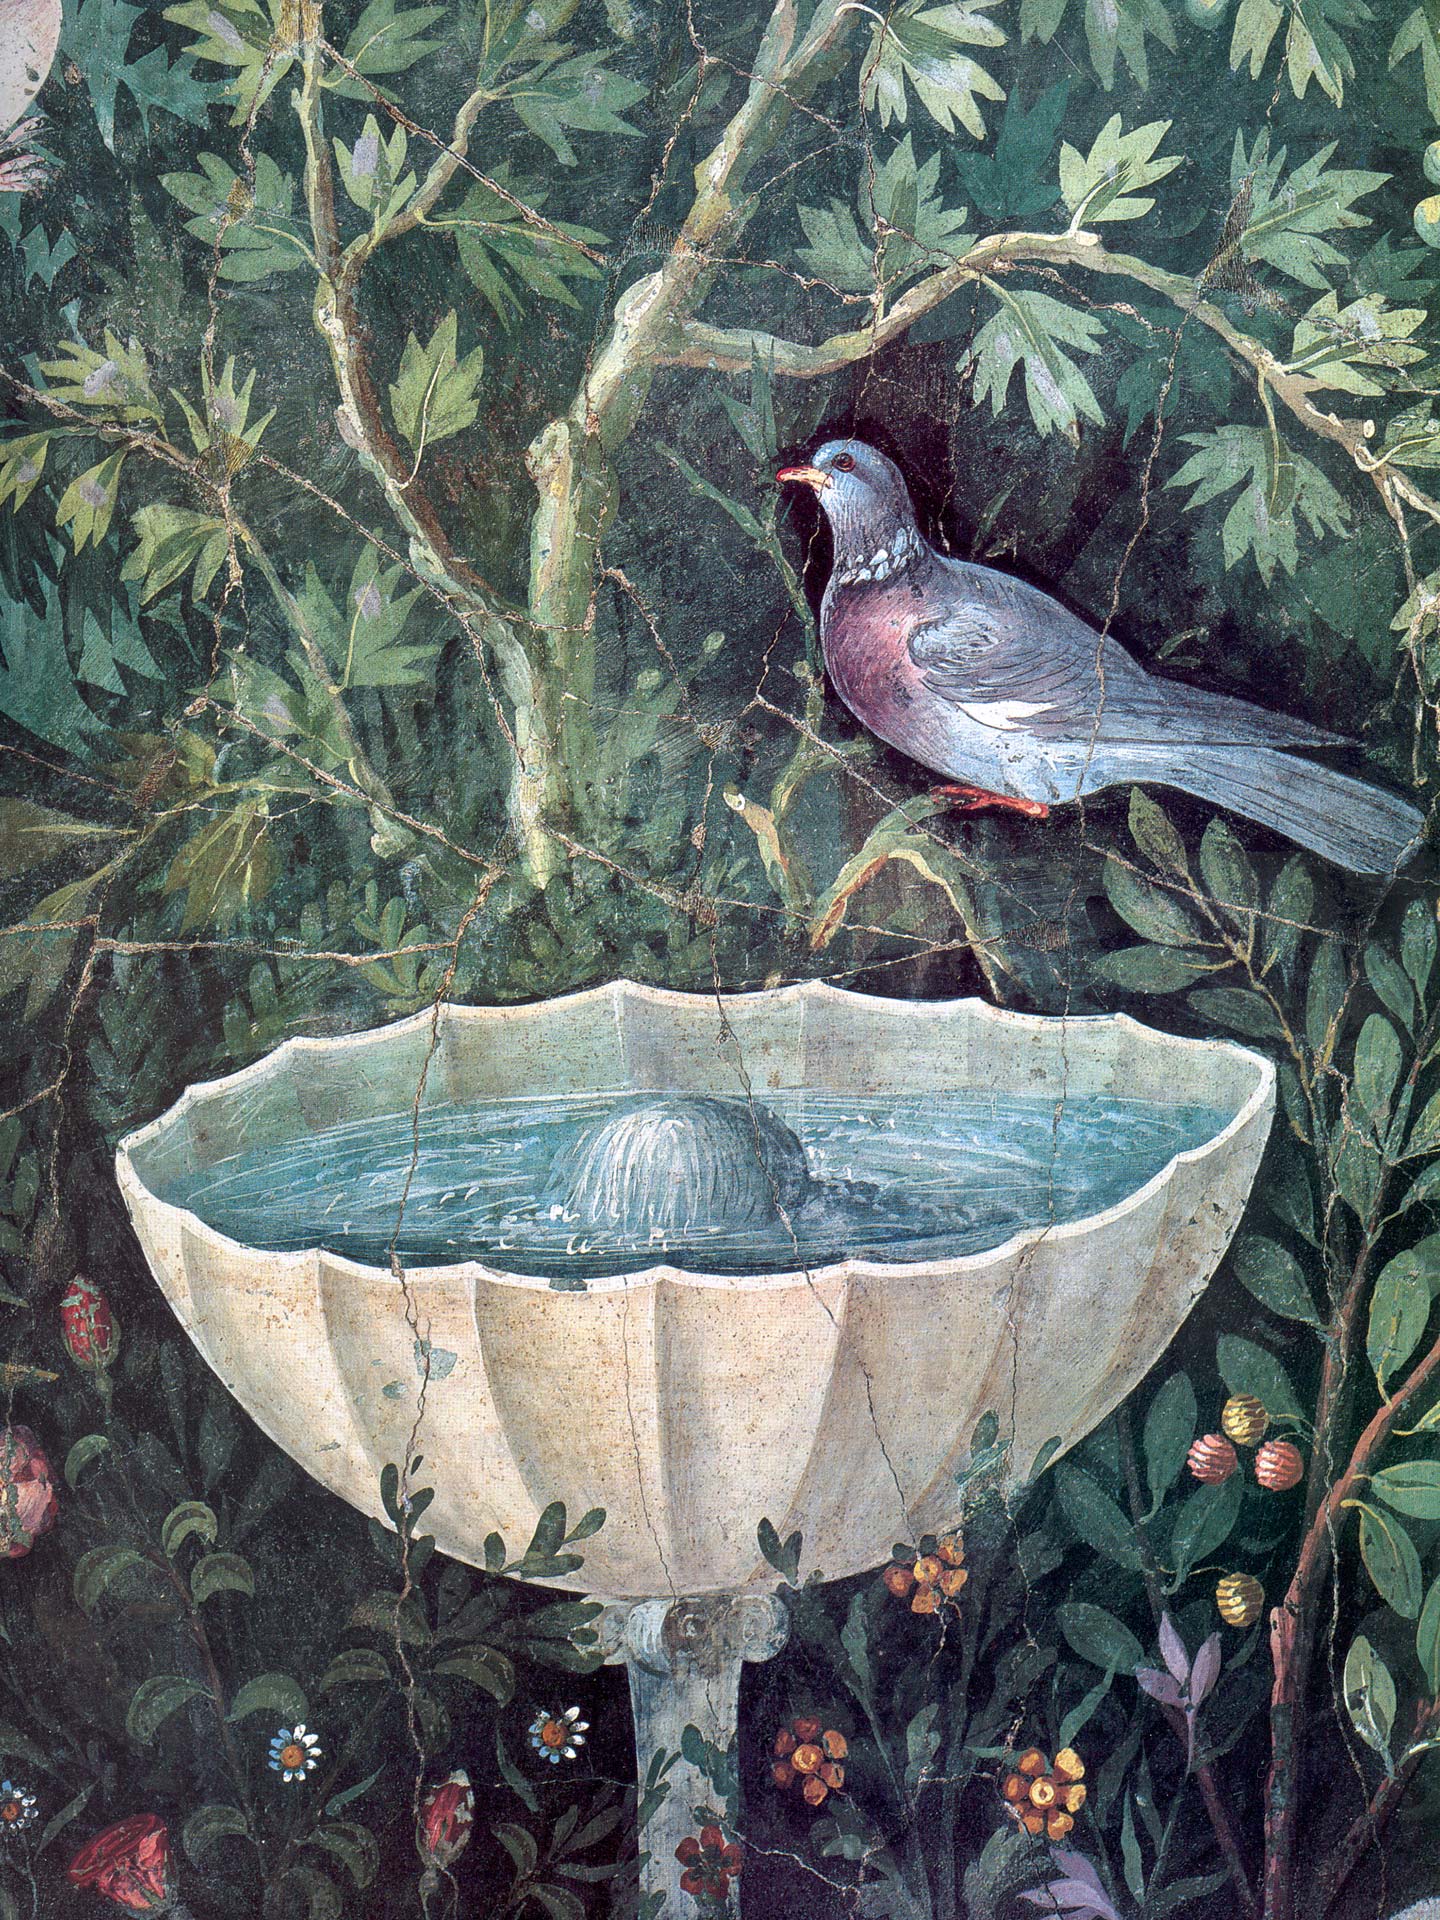 Fountain and bird from fresco of the triclinium of the House of the Golden Bracelet, Pompeii, Italy